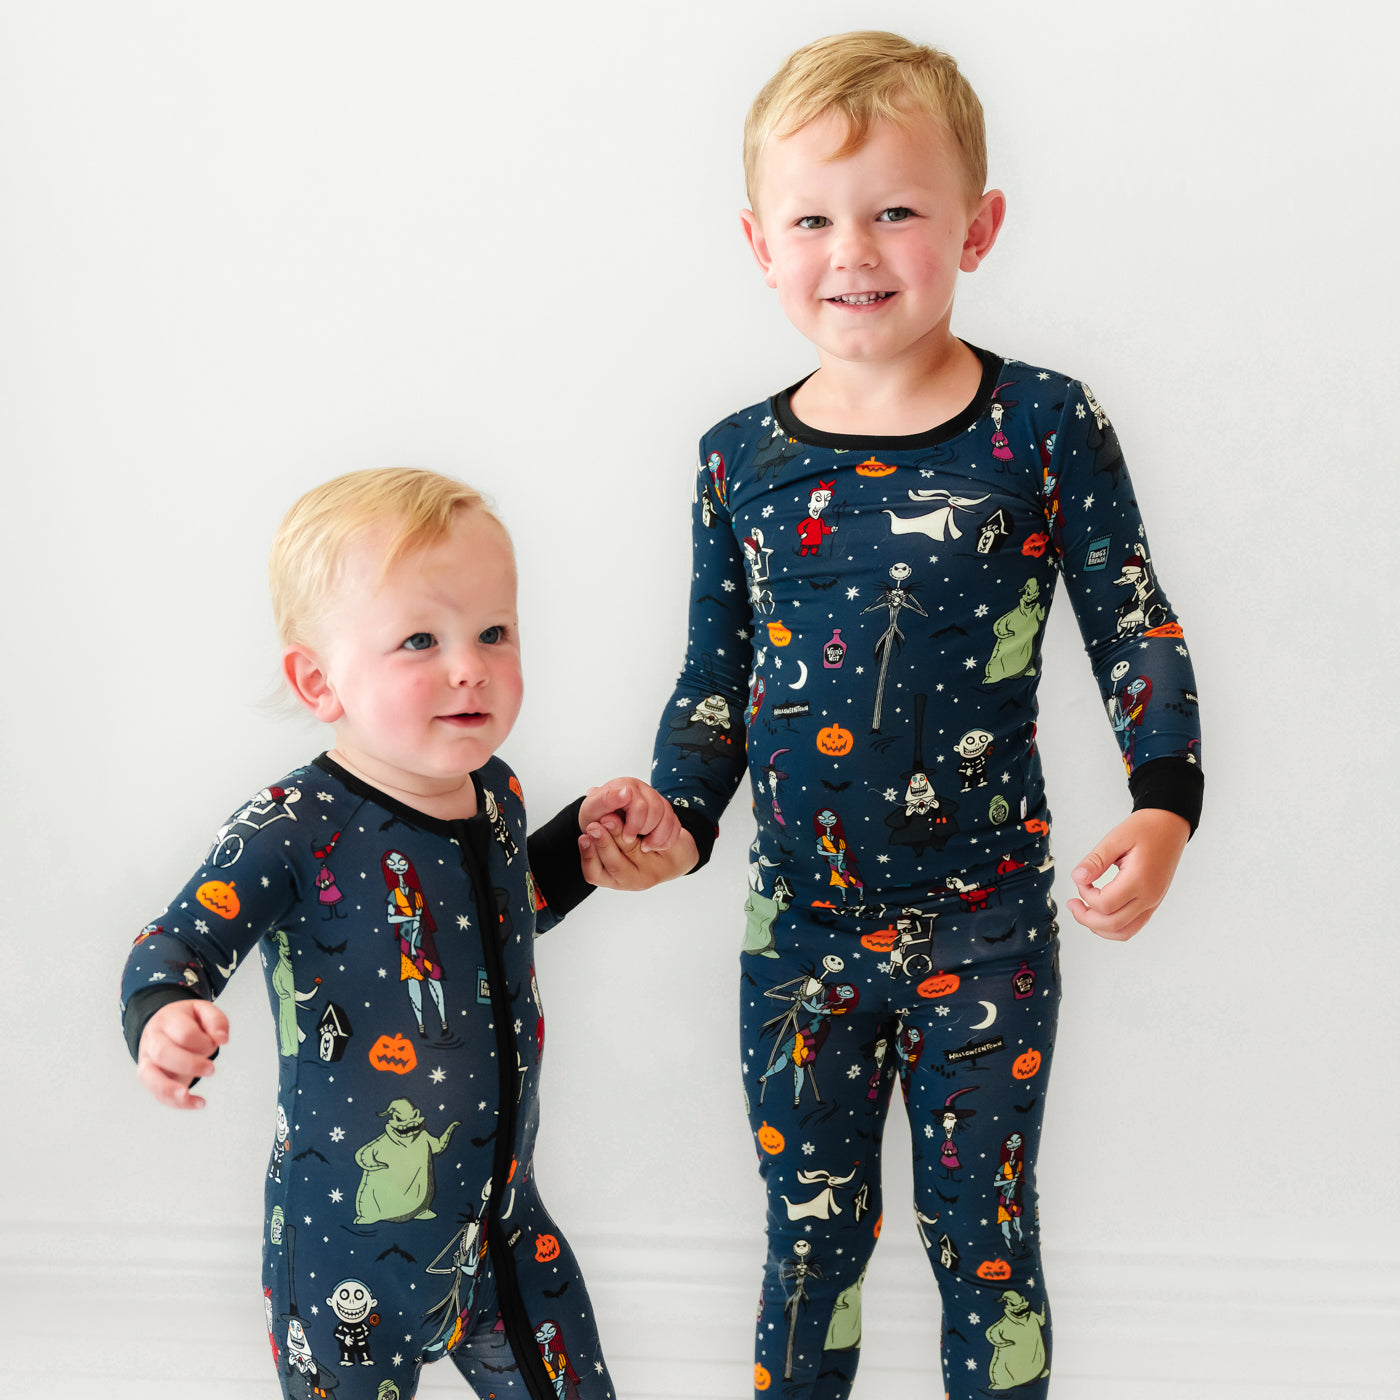 Two children holding hands wearing matching Jack Skellington and Friends printed pajamas